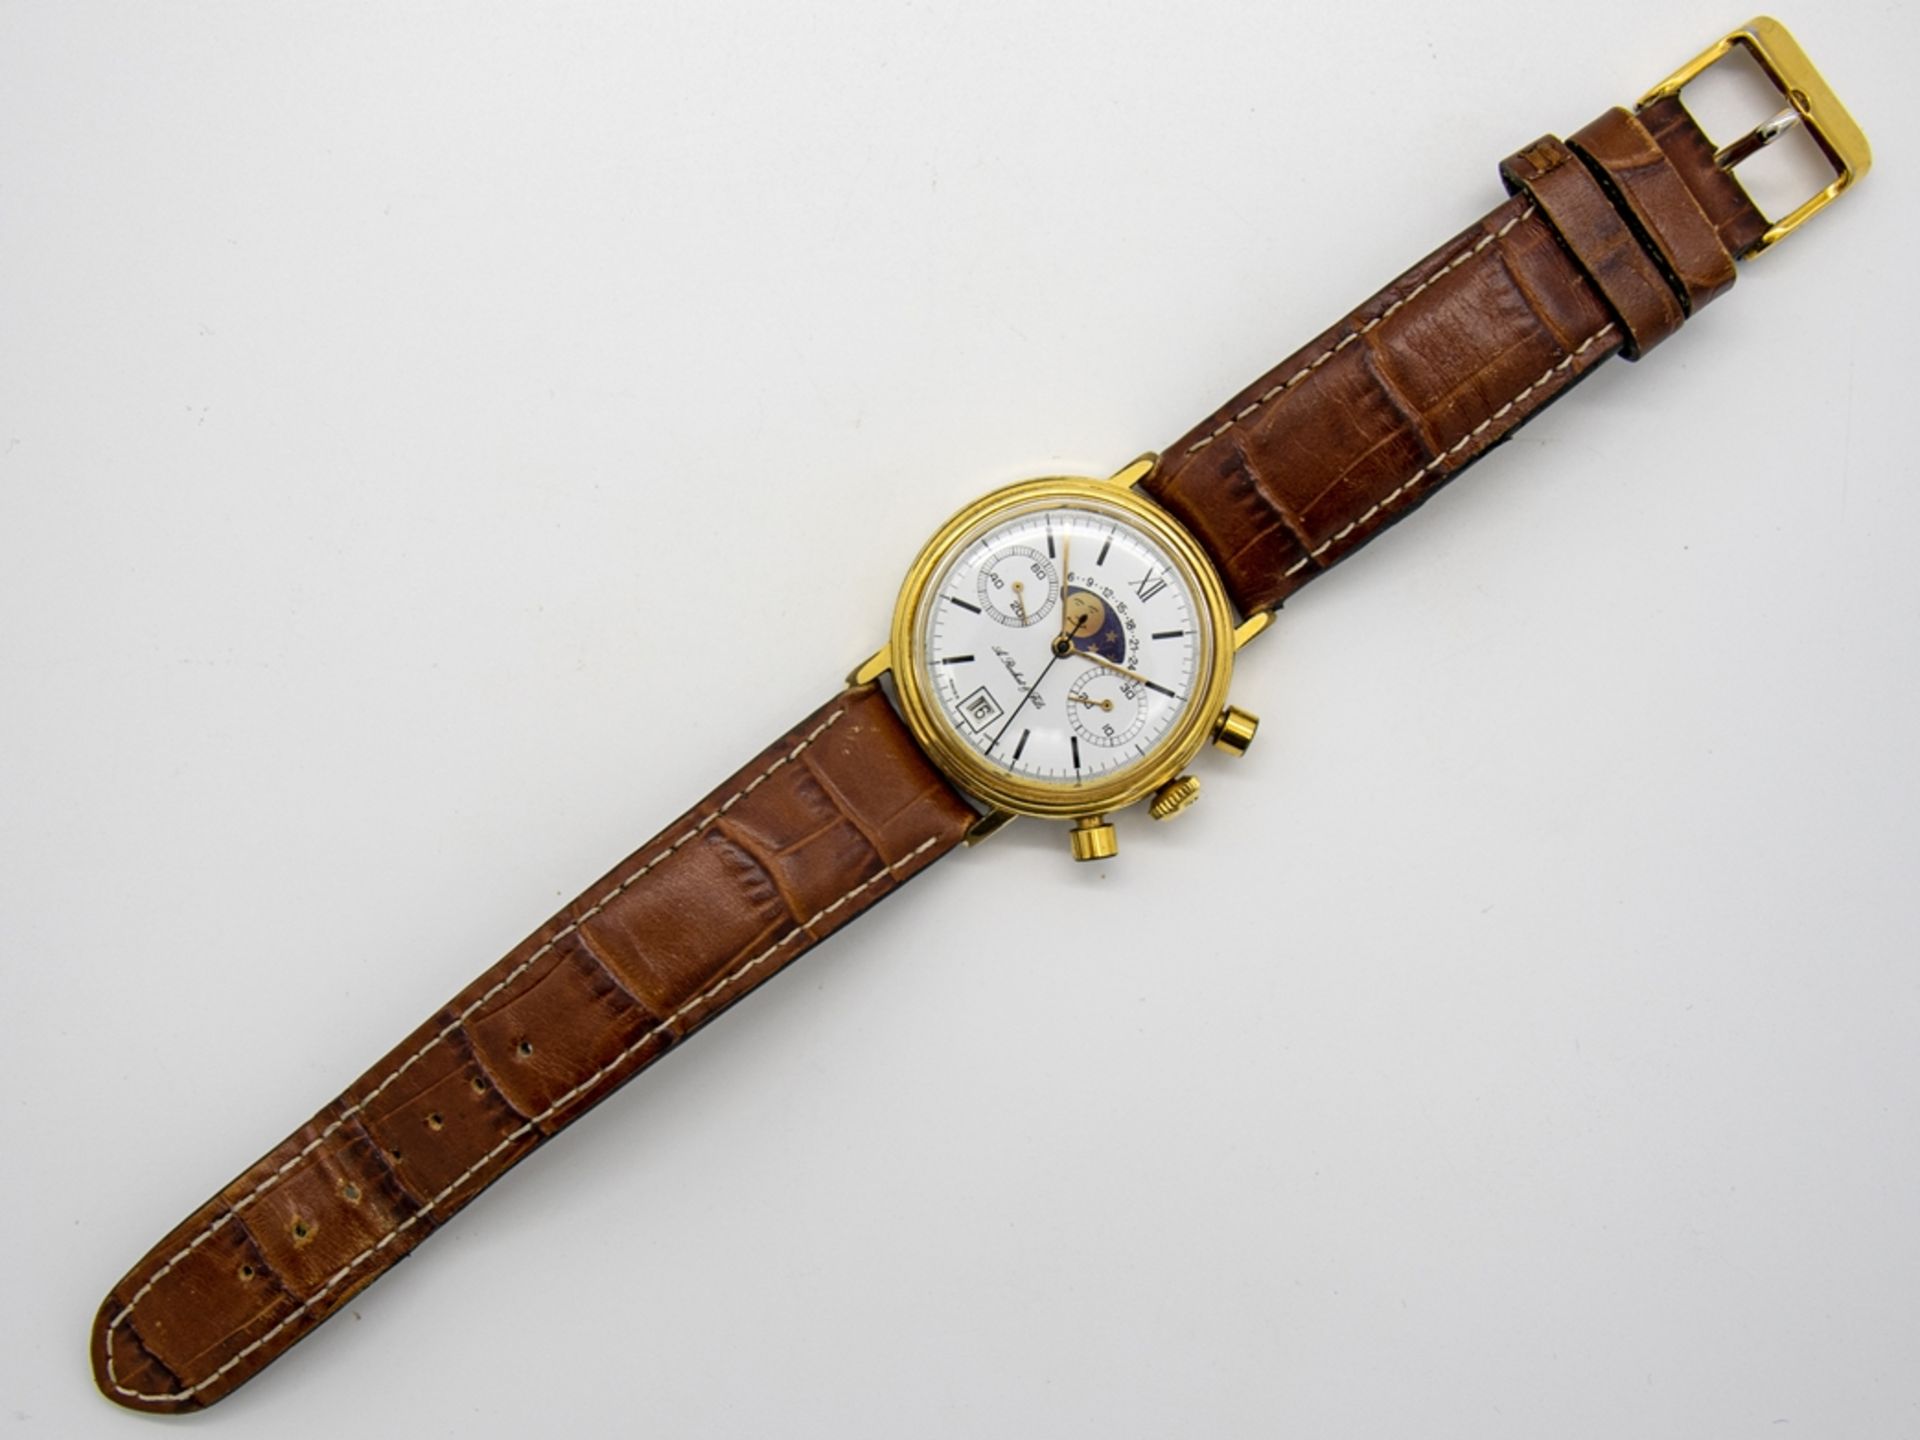 Chronoswiss Alfred Rochat & Fils Lunar Moonphase Ref.: 34.300 - Image 5 of 5